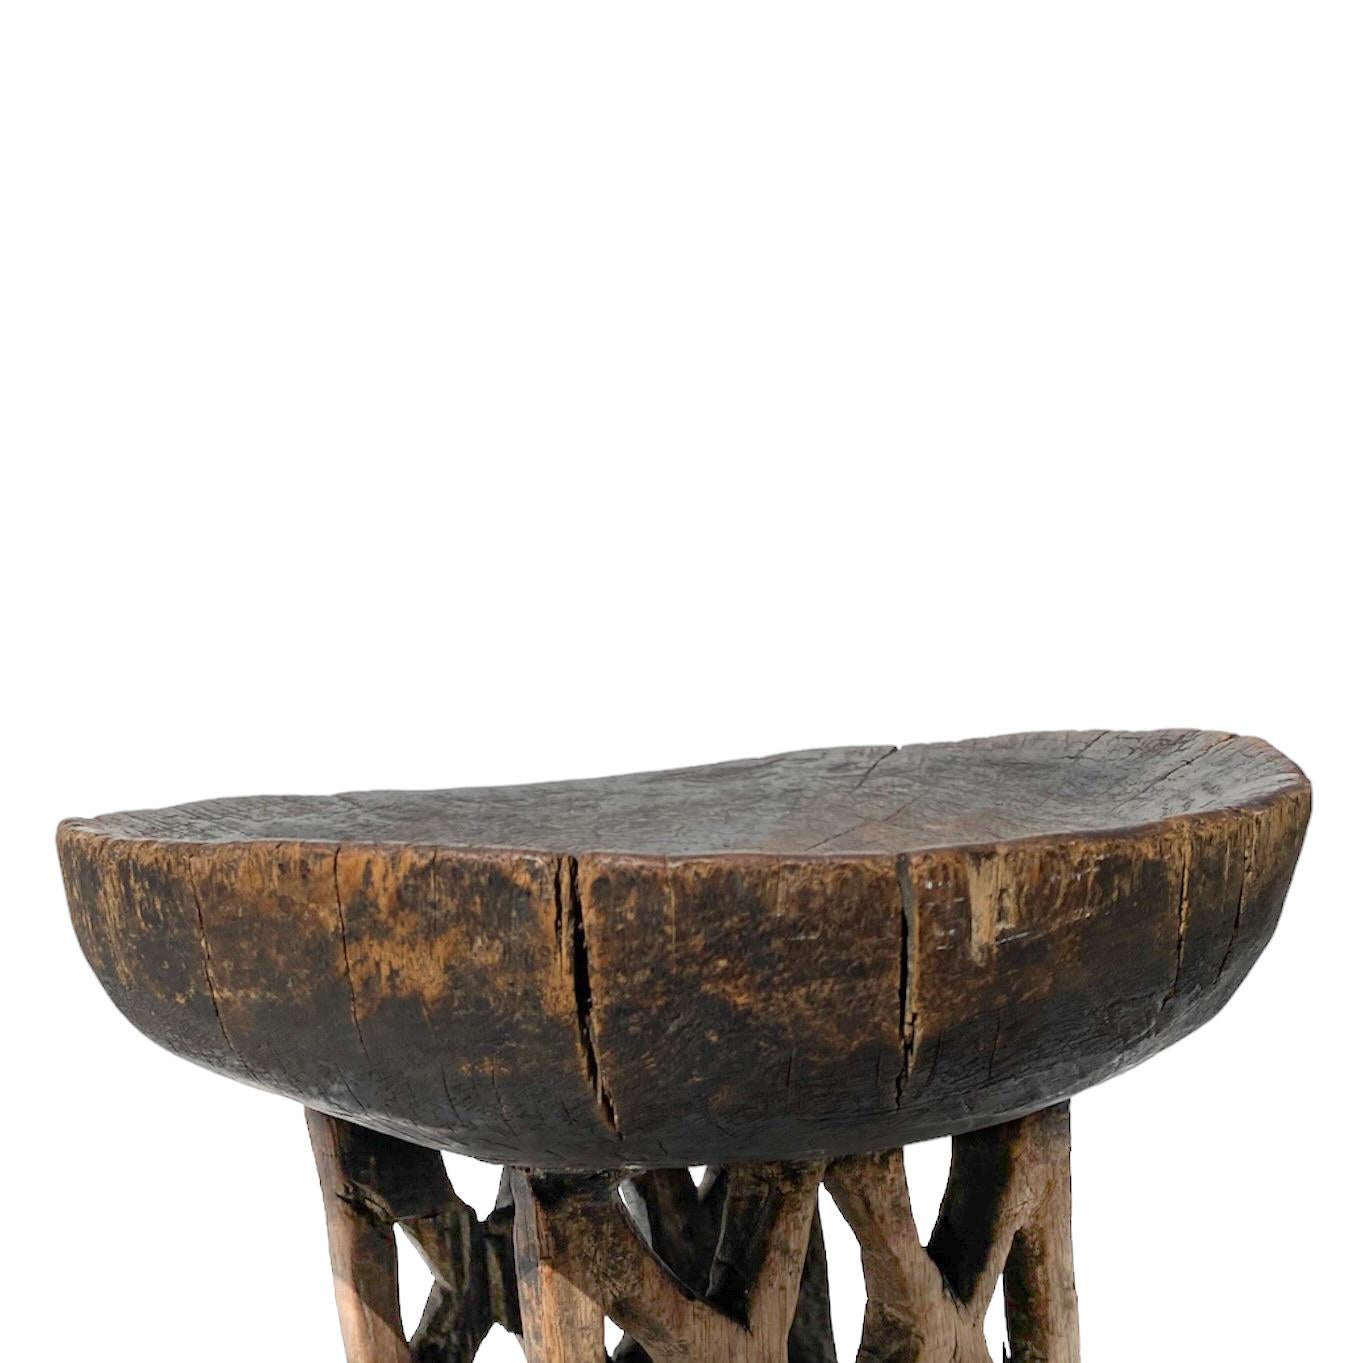 These striking stools are hand carved from a single piece of hardwood by the Tonga people who are an ethic Bantu group from Southern Zambia and the neighb-ouring Northern Zimbabwe.? ?These stools have been designed with portability in mind as guests